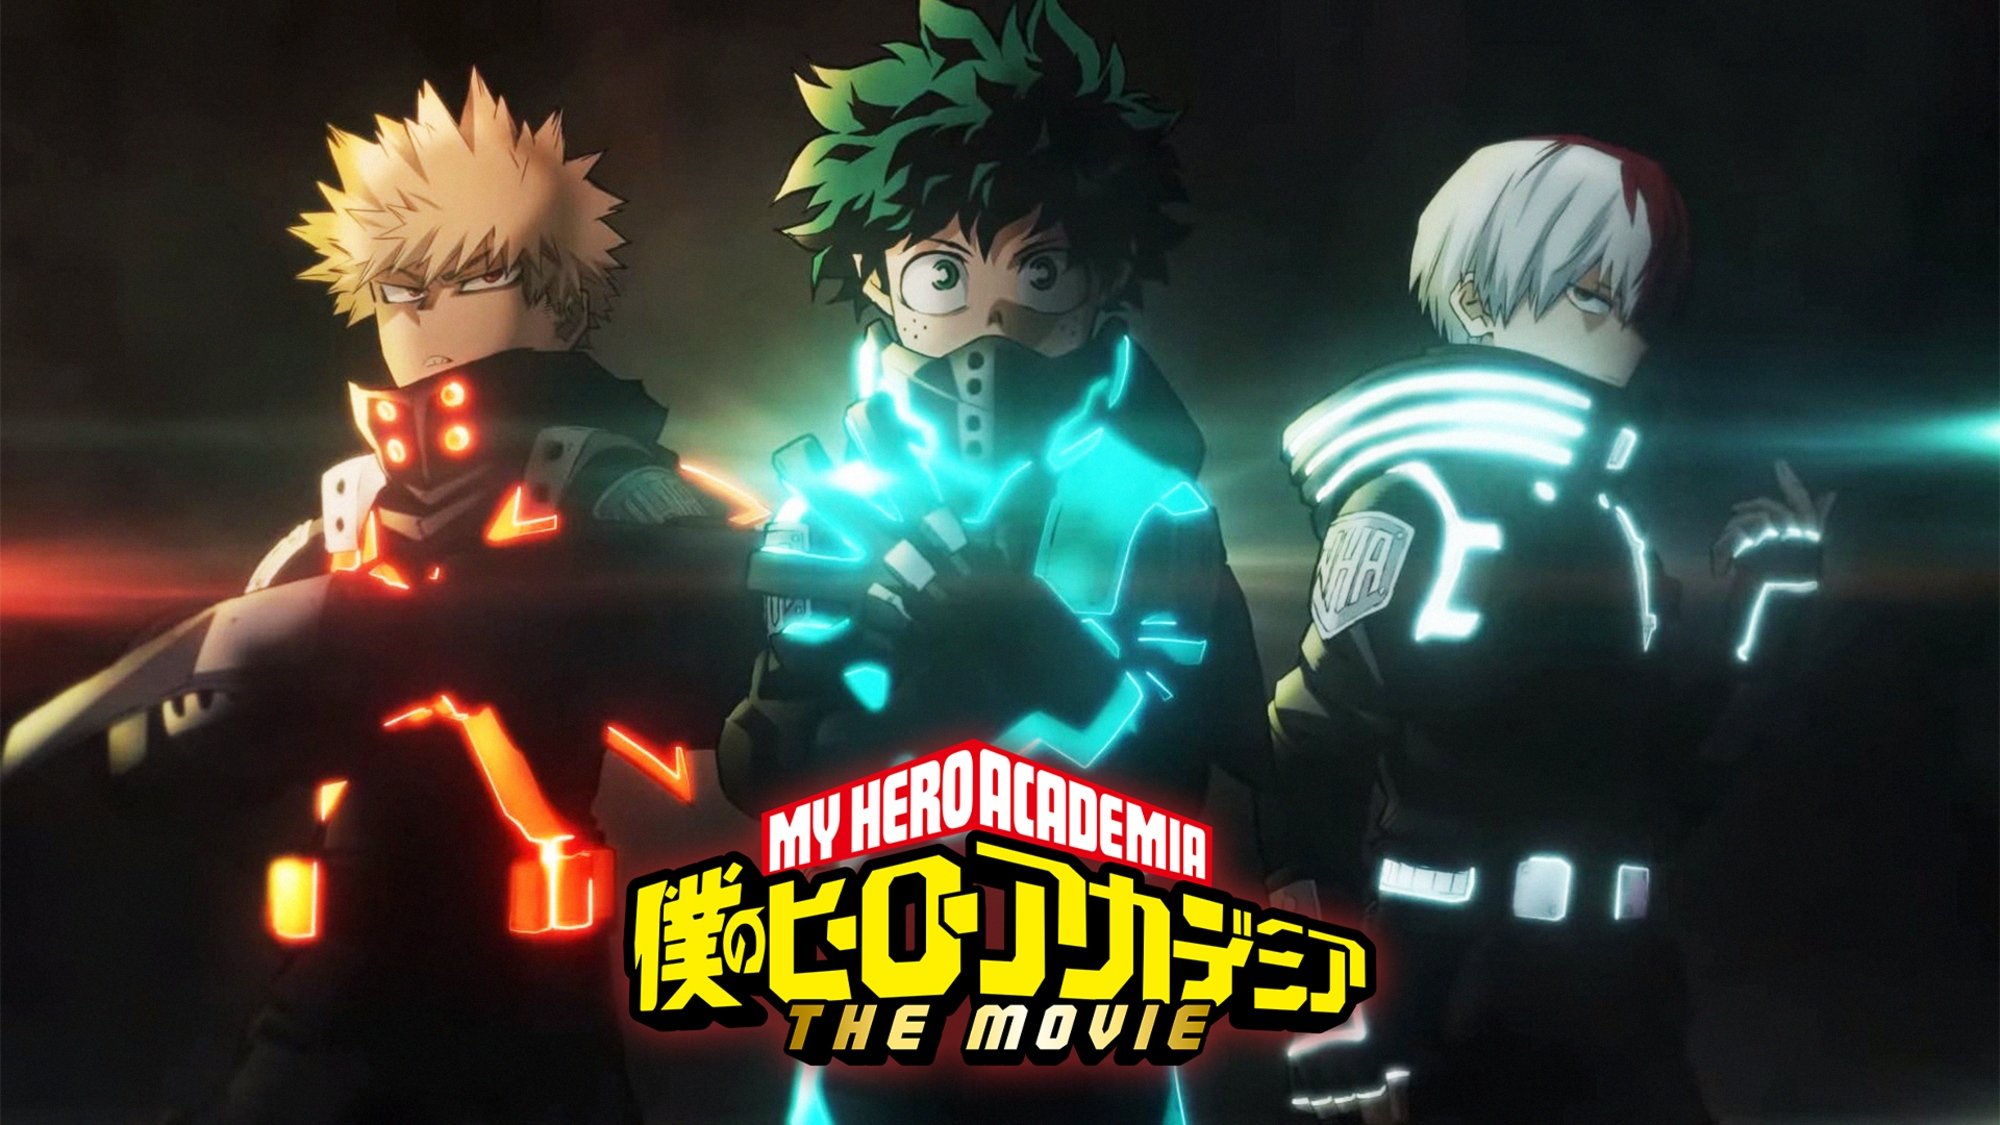 'My Hero Academia: World Heroes' Mission' Anime Film Gets October